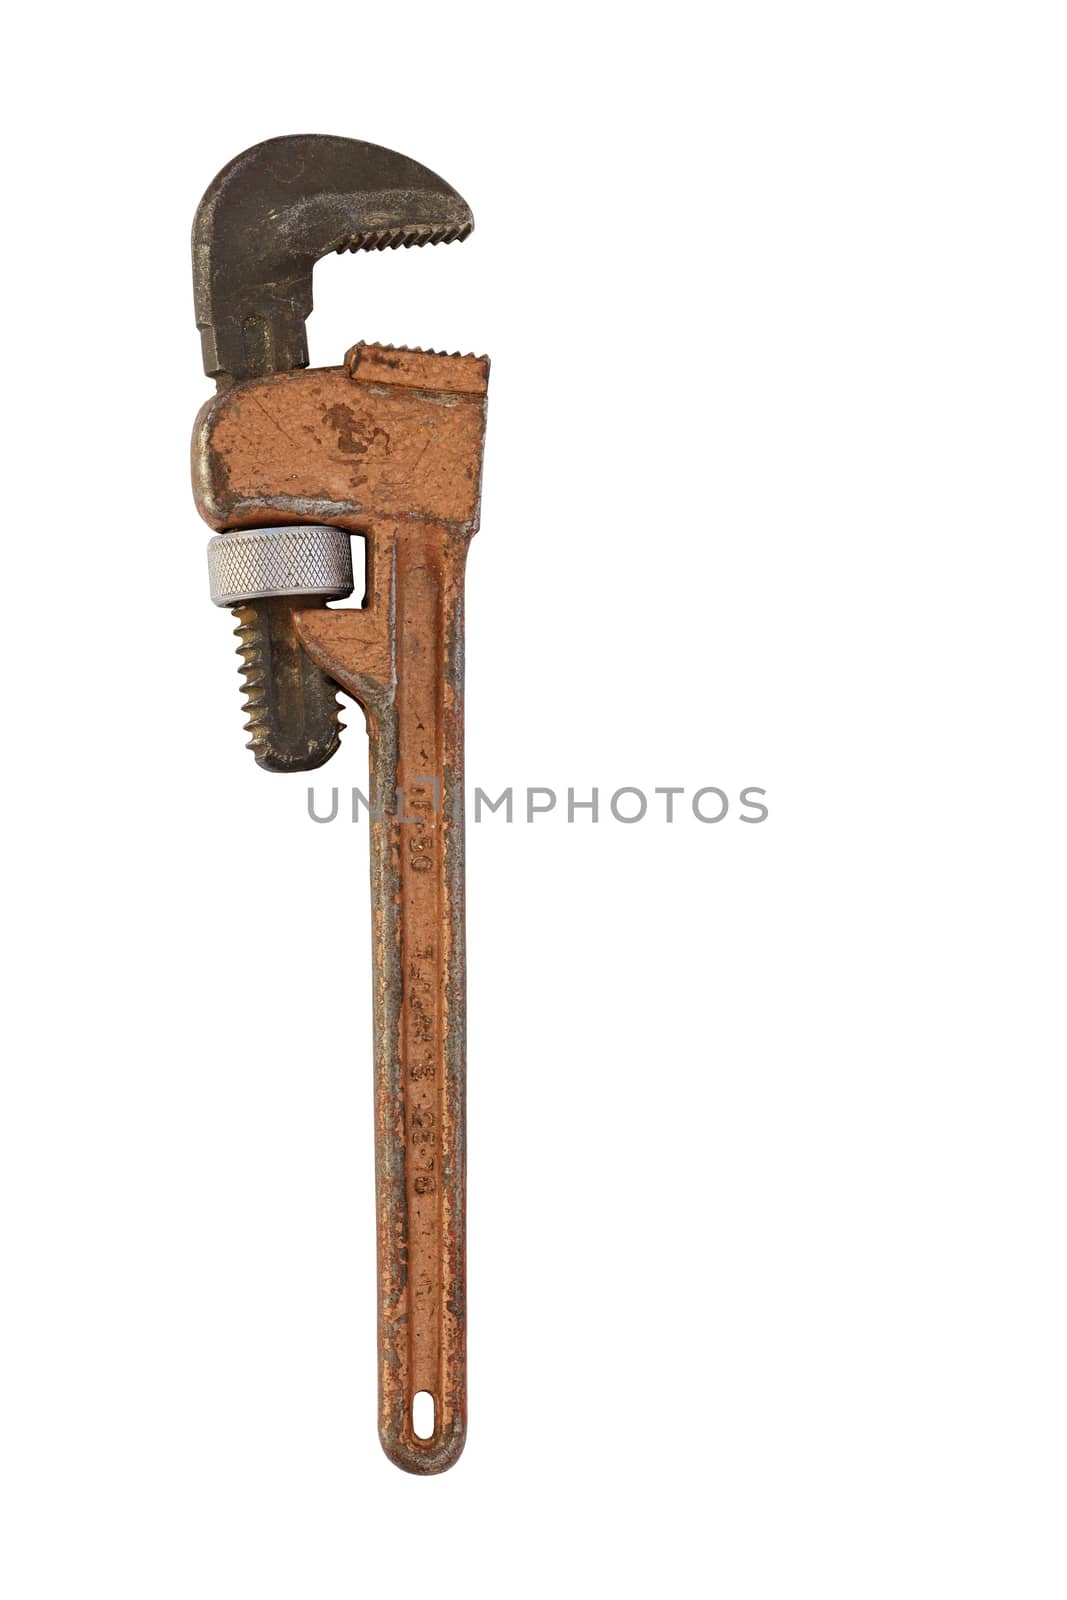 An old metal adjustable pipe wrench is positioned vertically and is isolated on a white background.